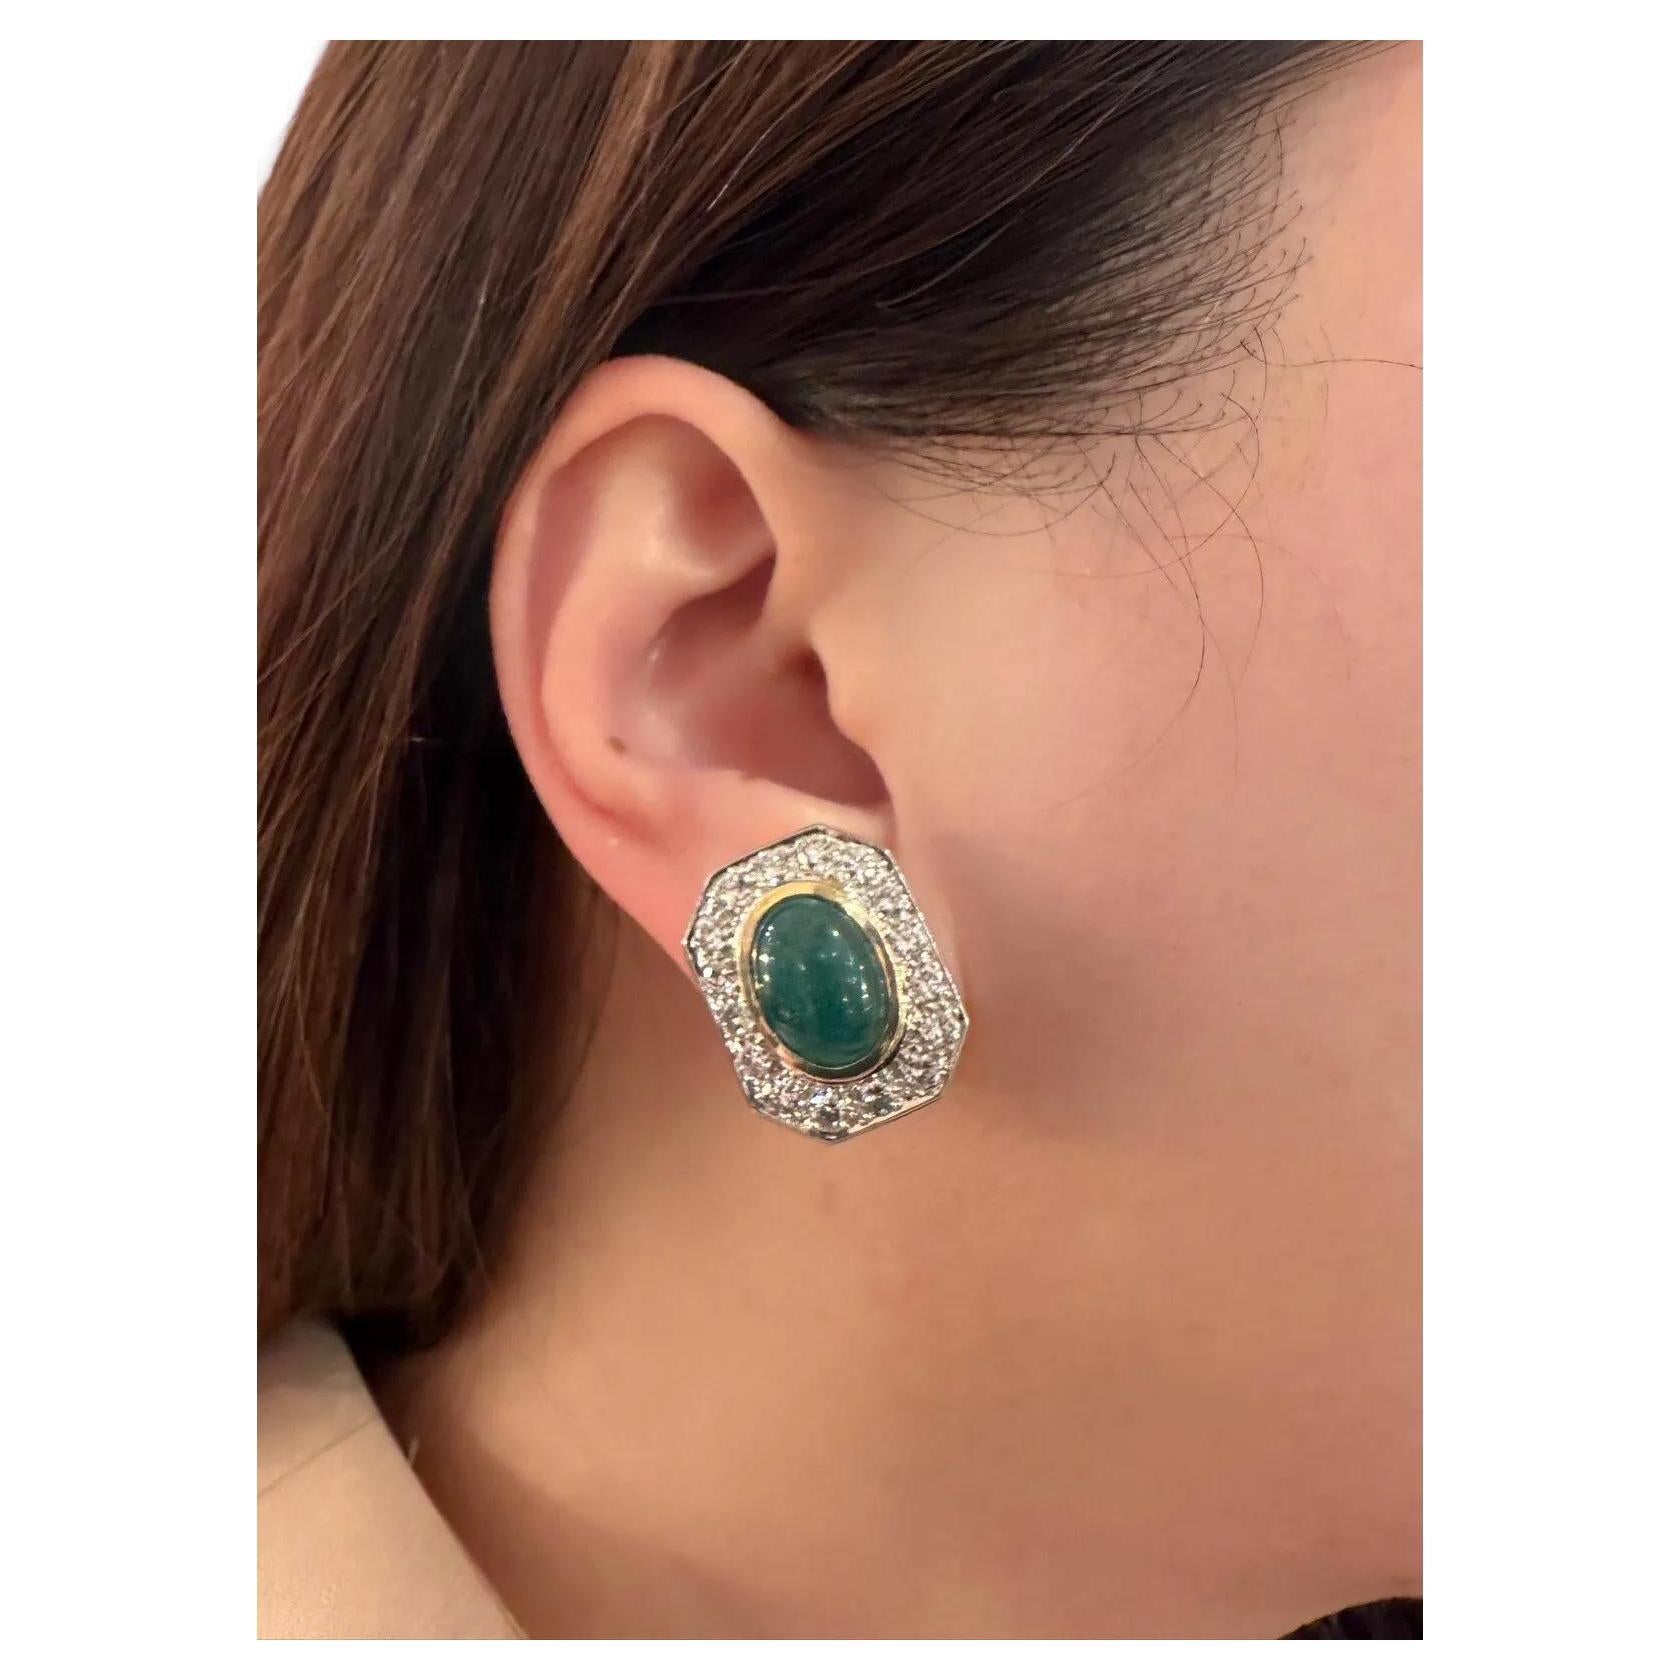 Emerald Cabochon and Diamond Statement Earrings in 18k Yellow Gold

Diamond and Emerald Earrings feature Oval-shaped Emerald Cabochons surrounded by Round Brilliant Cut Diamonds set in 18k Yellow Gold. The earrings are secured by clip on